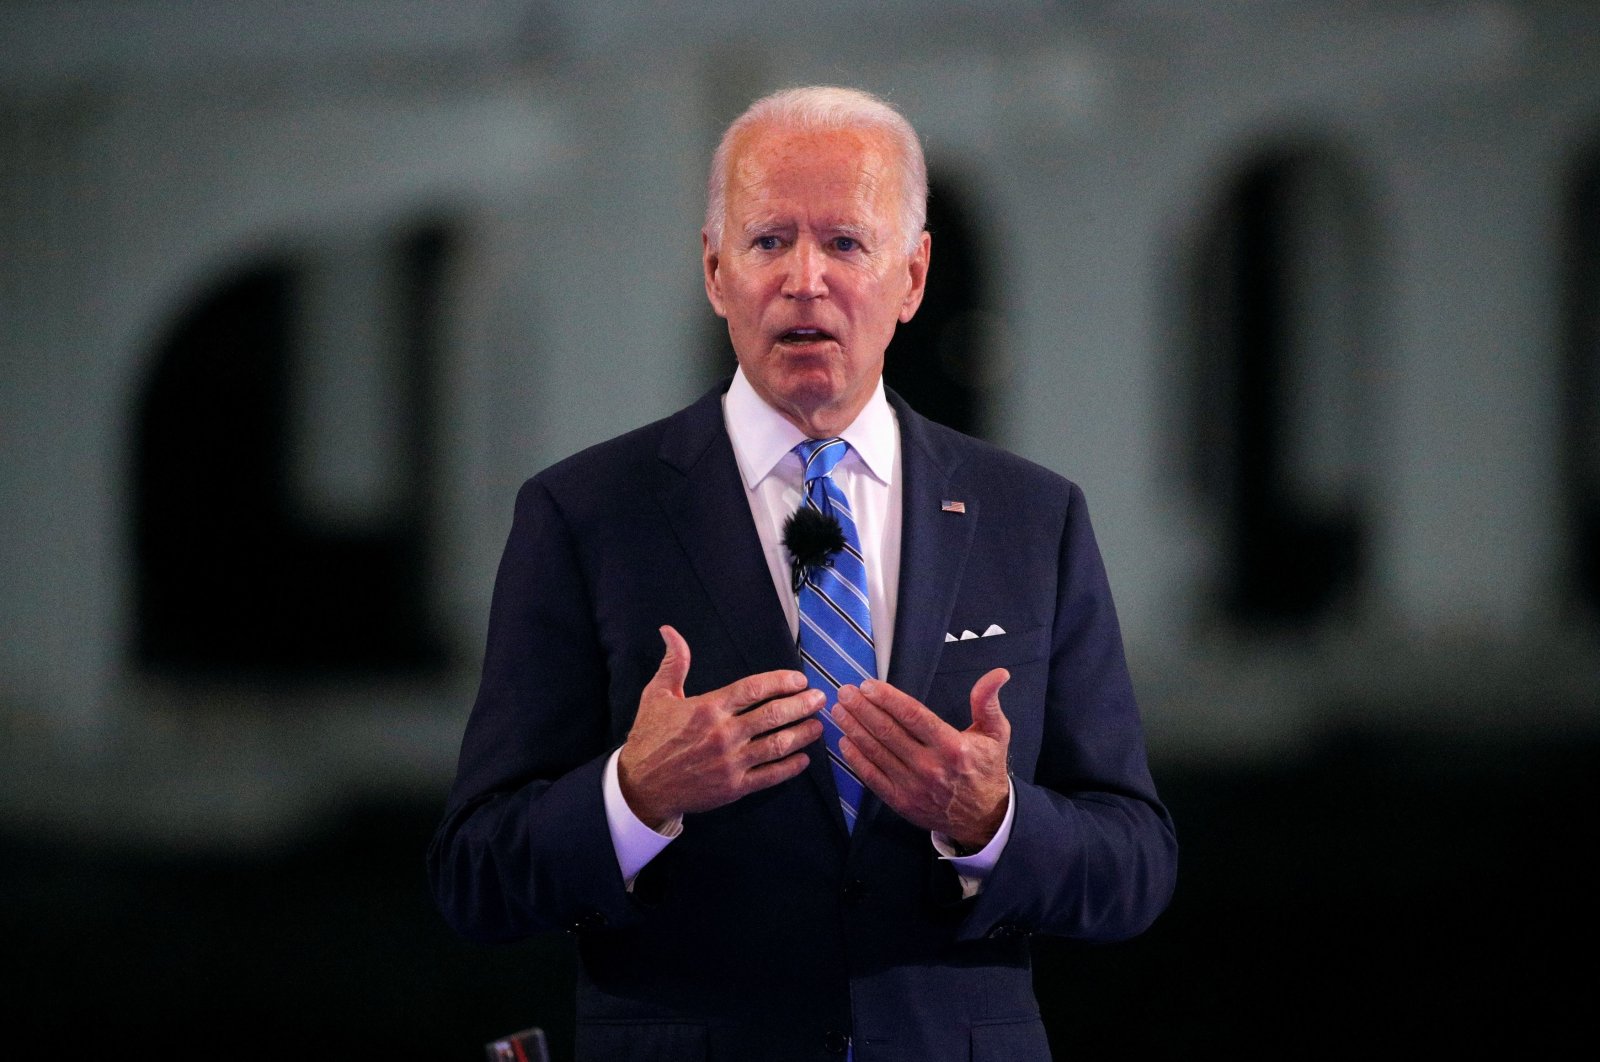 U.S. Democratic presidential candidate and former Vice President Joe Biden speaks during an NBC News town hall event while campaigning for president in Miami, Florida, U.S., Oct. 5, 2020.  (REUTERS Photo)